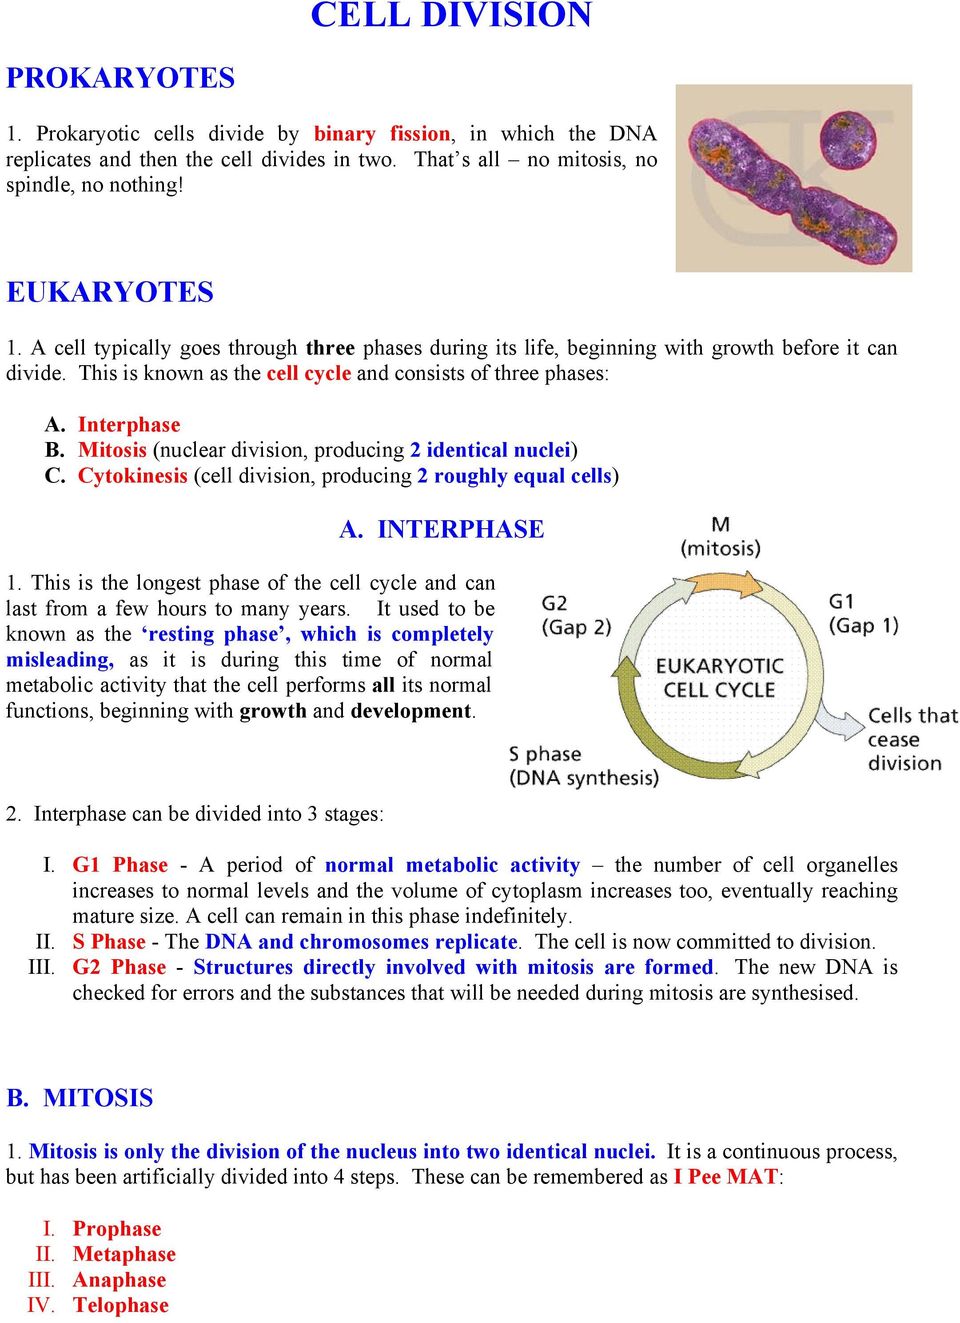 Interphase Mitosis (nuclear division, producing 2 identical nuclei) Cytokinesis (cell division, producing 2 roughly equal cells) A. INTERPHASE 1.